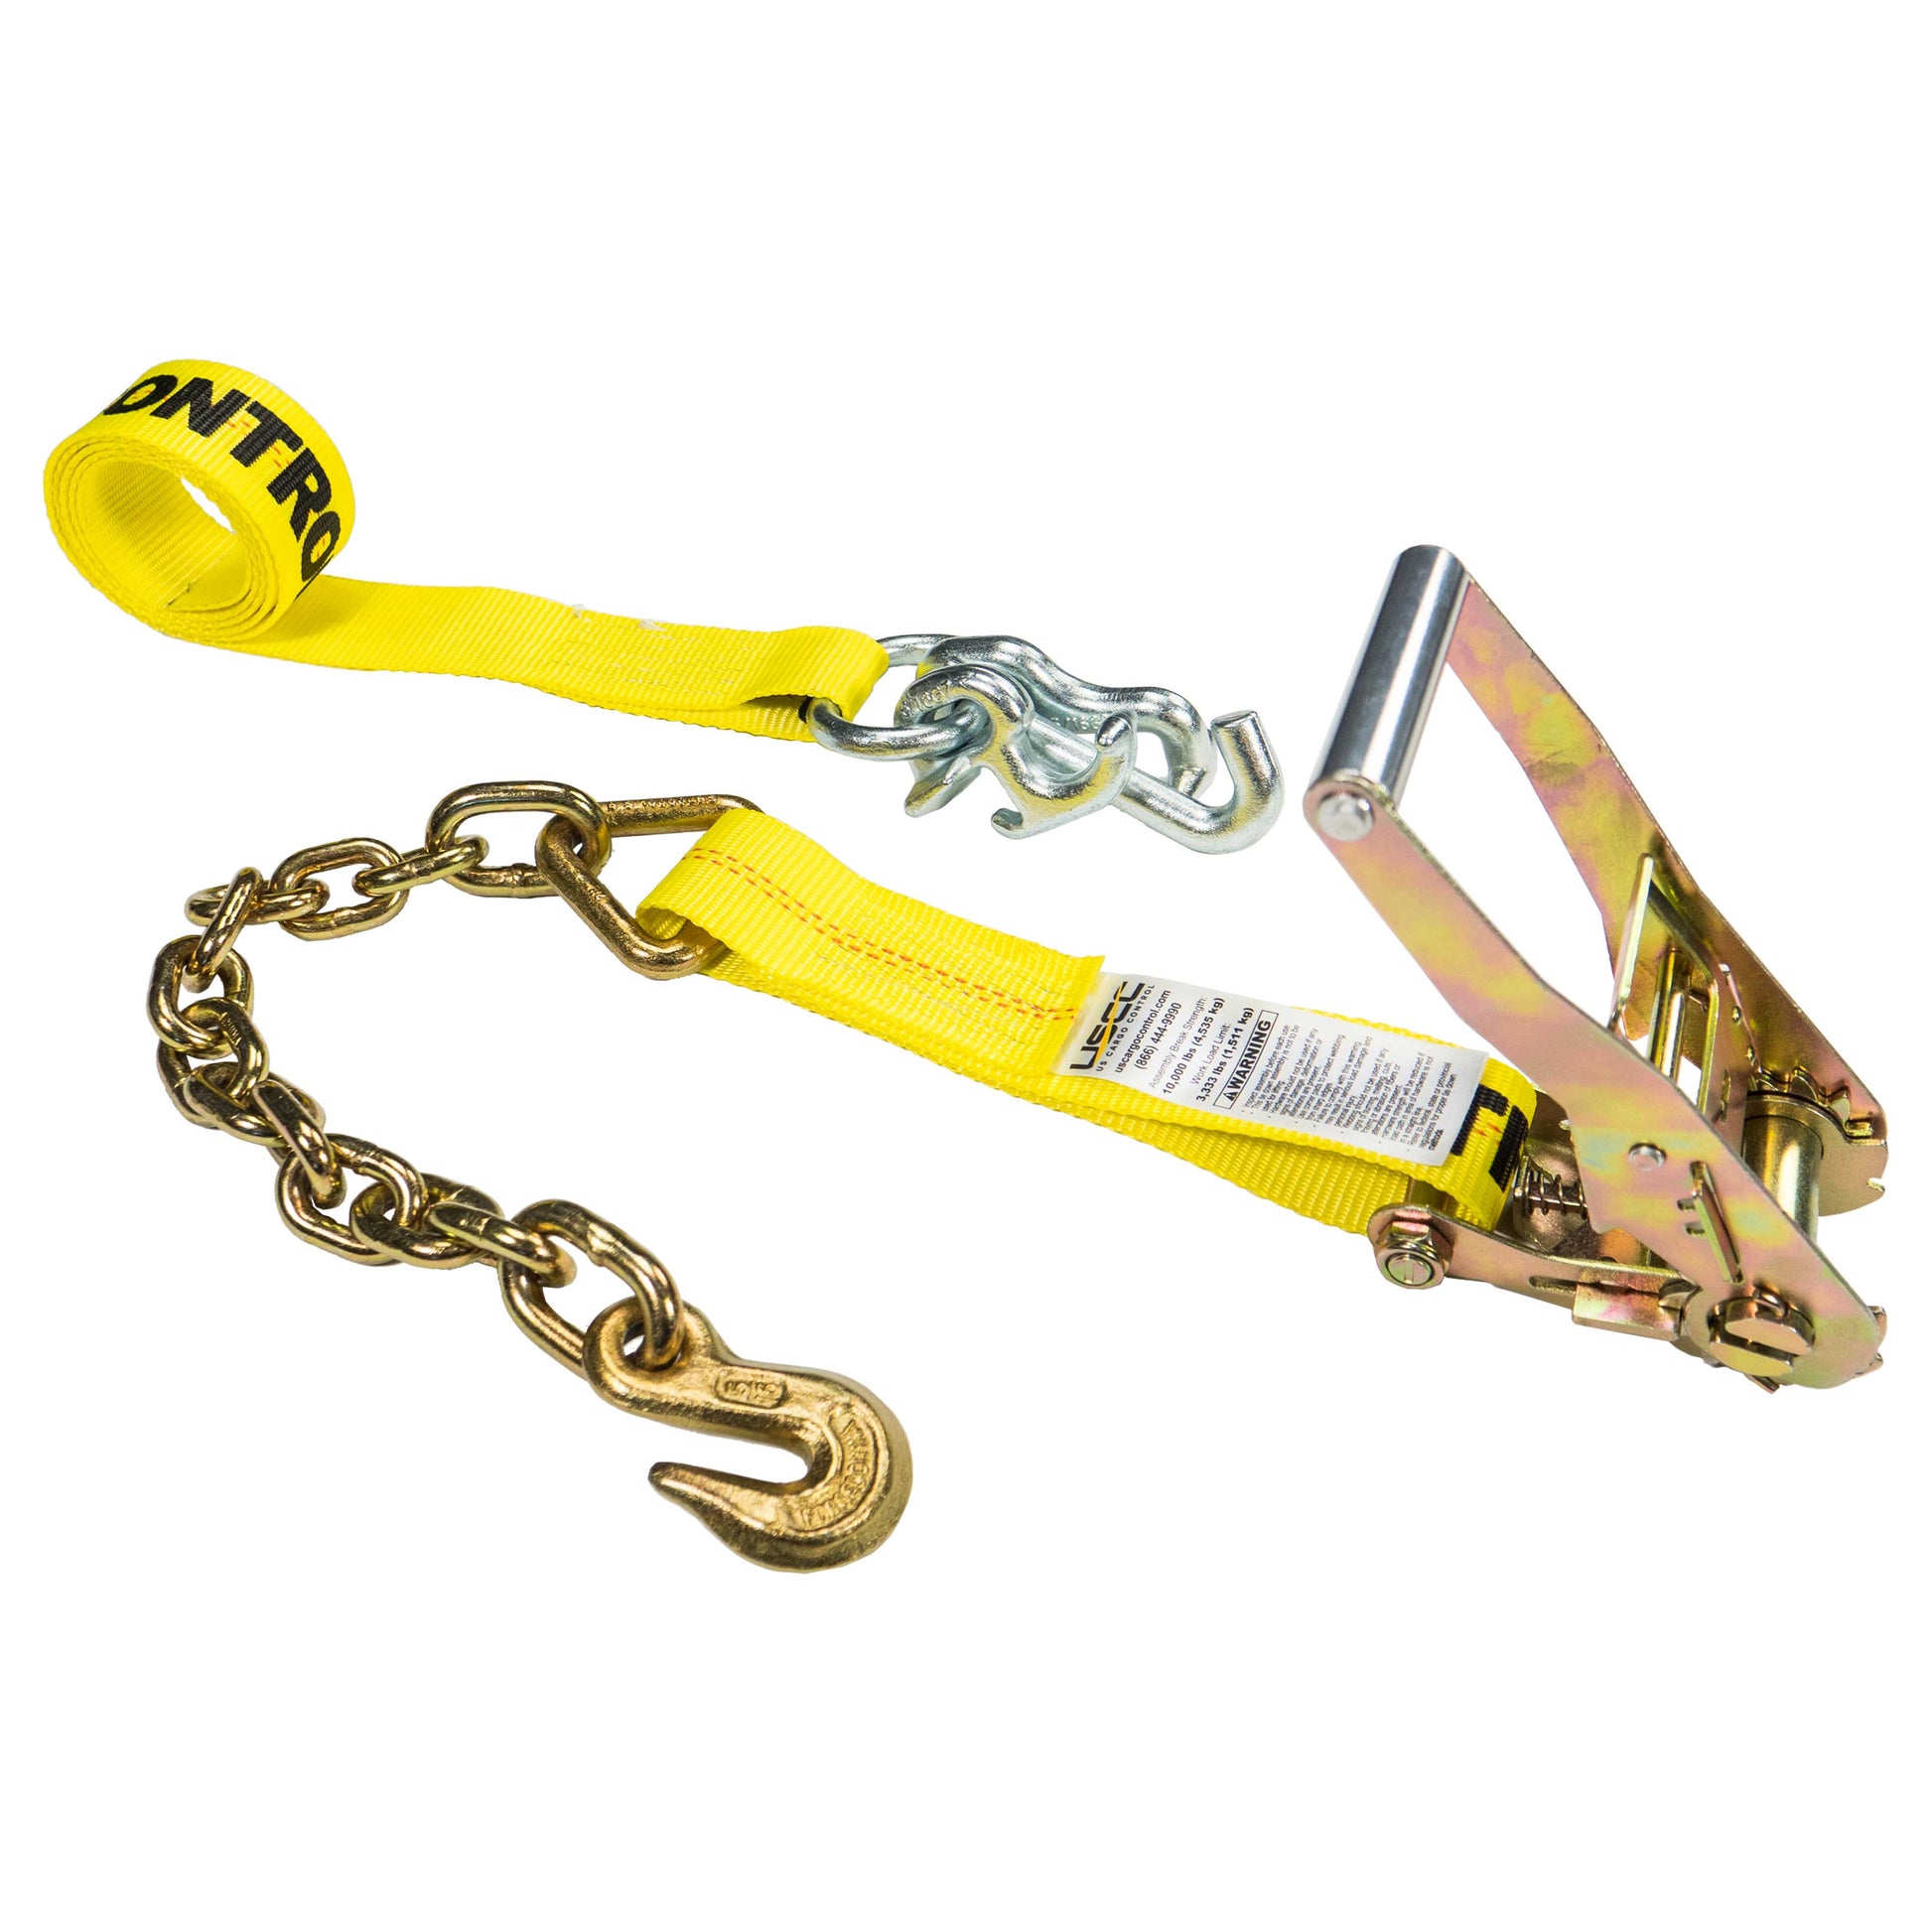 2" x 8' Ratchet Strap with Chain Extension and RTJ Cluster Hook